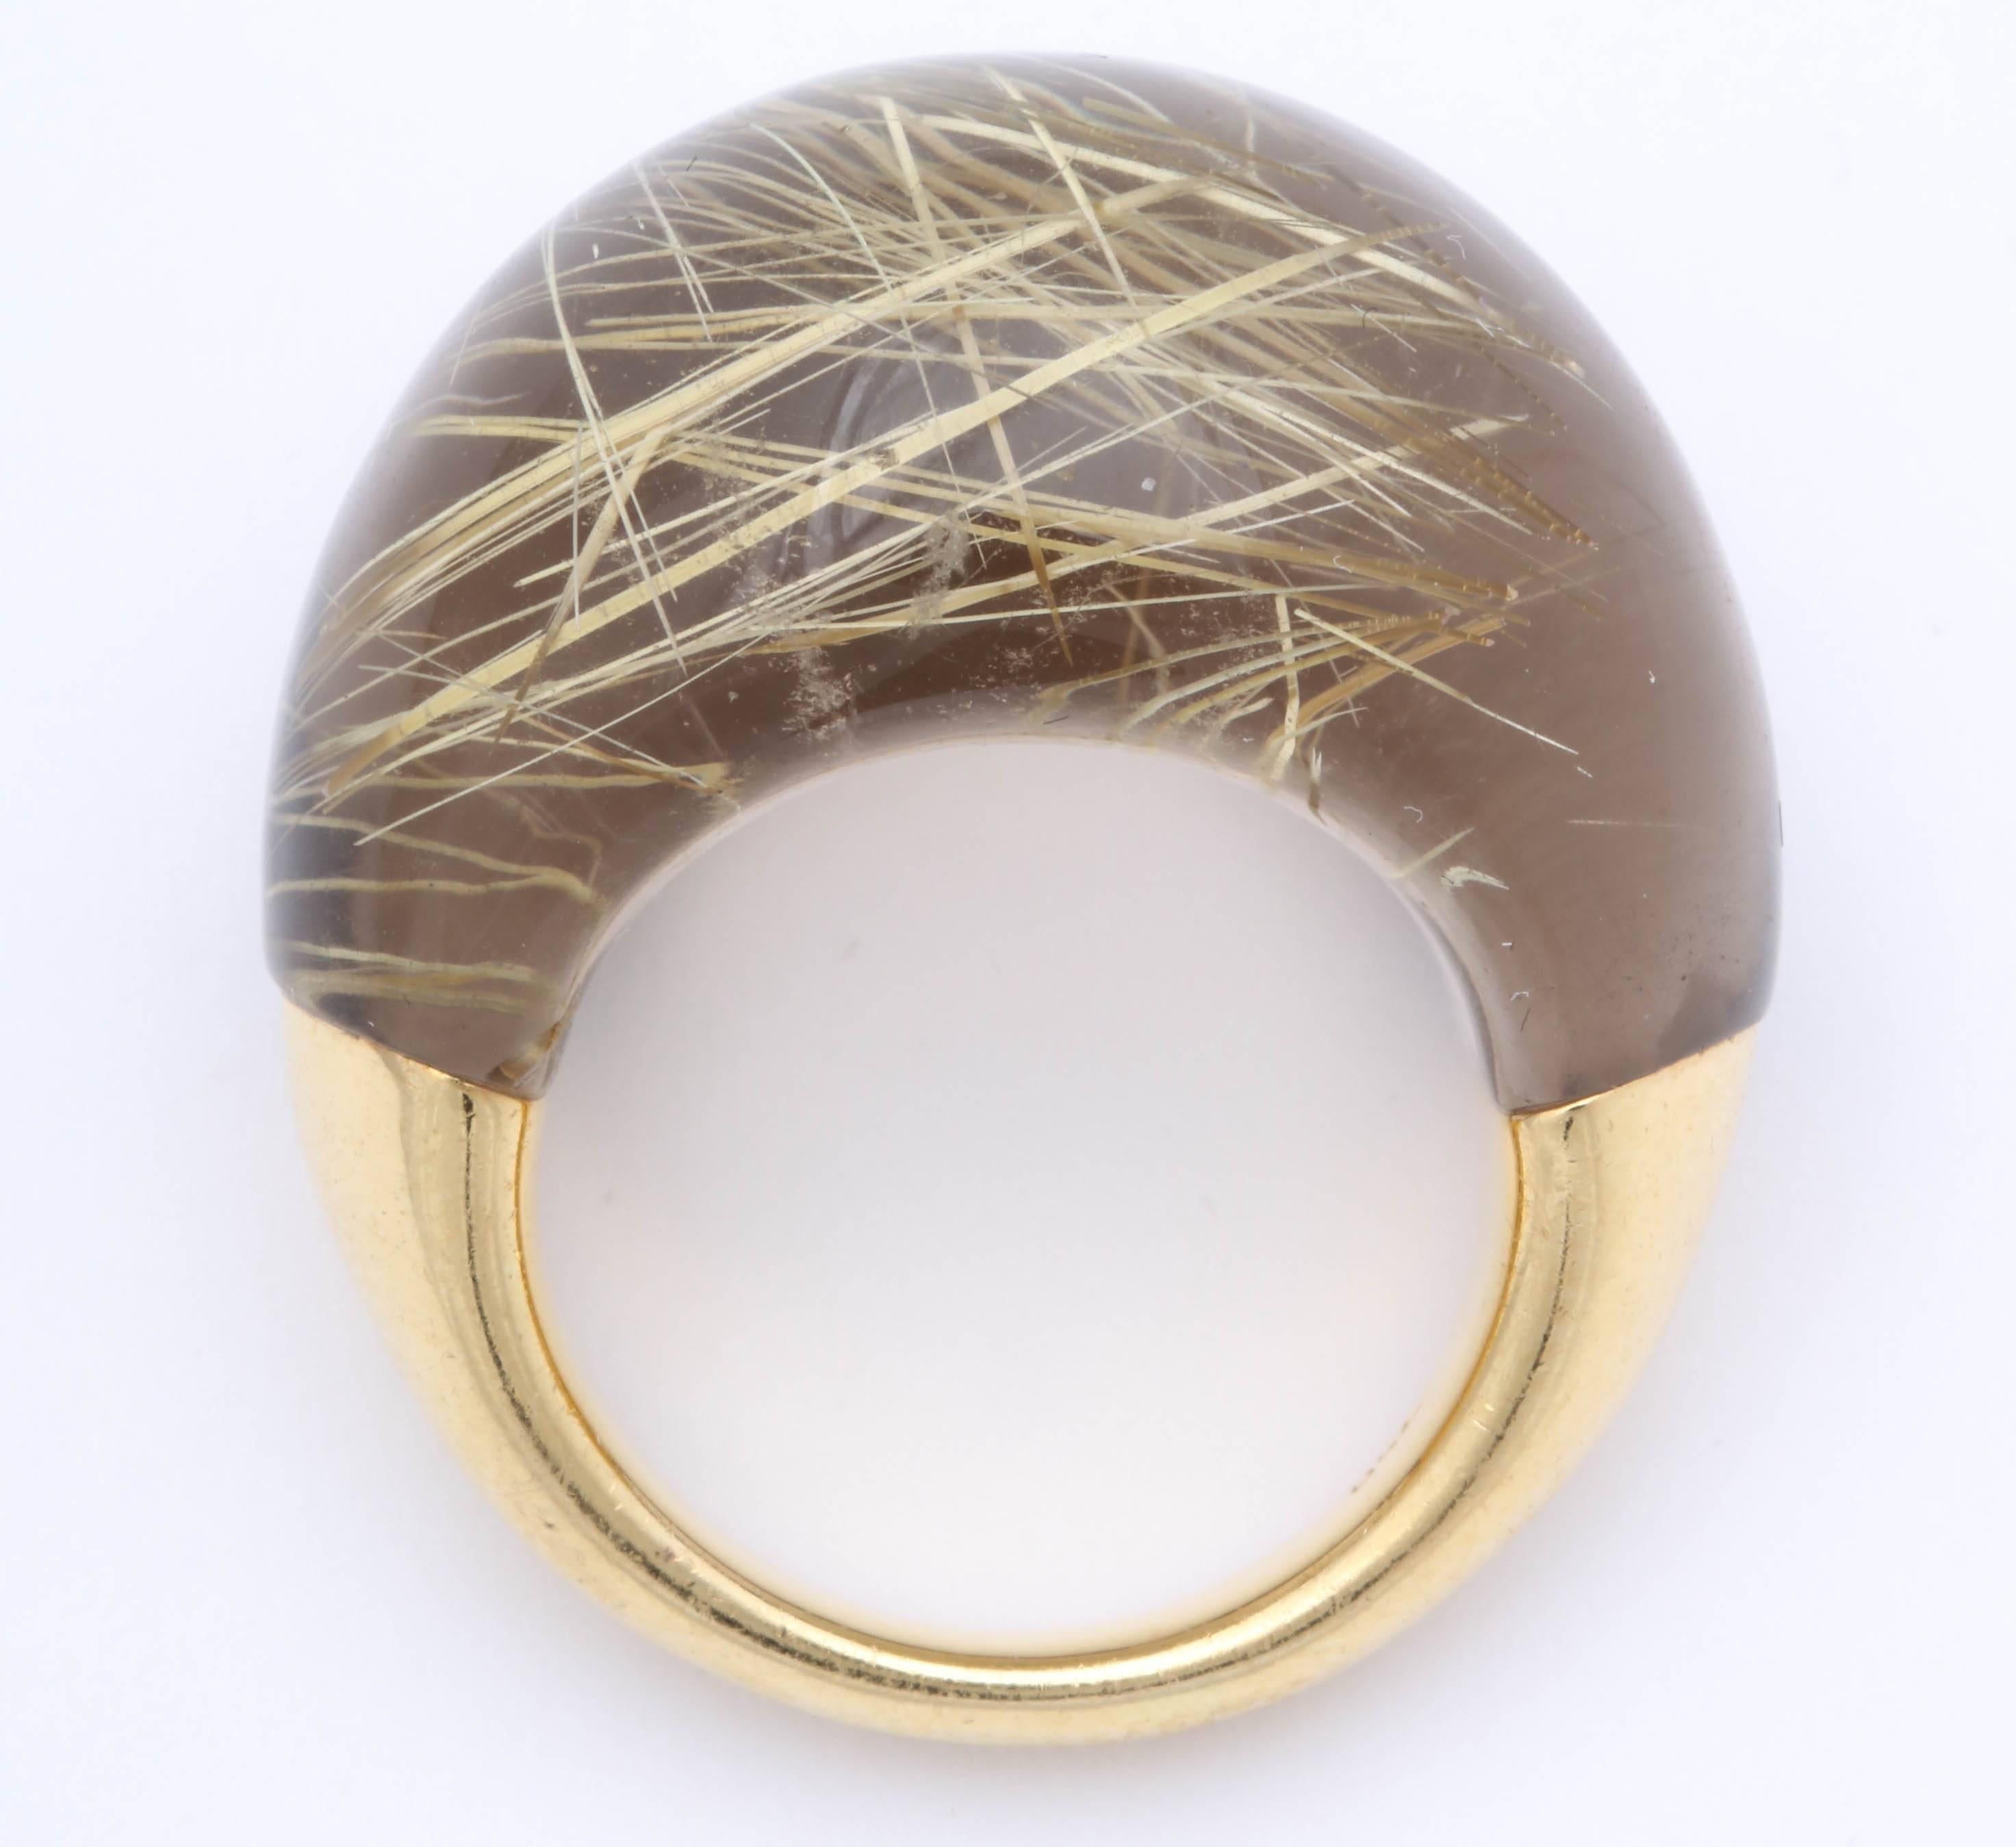 Modernist 18kt Yellow Gold Ring domed by a polished Rutilated Quartz Top   Very high style and chic.  Honey blond stone with evidence of quartz interior. Marked 750 for 18kt.